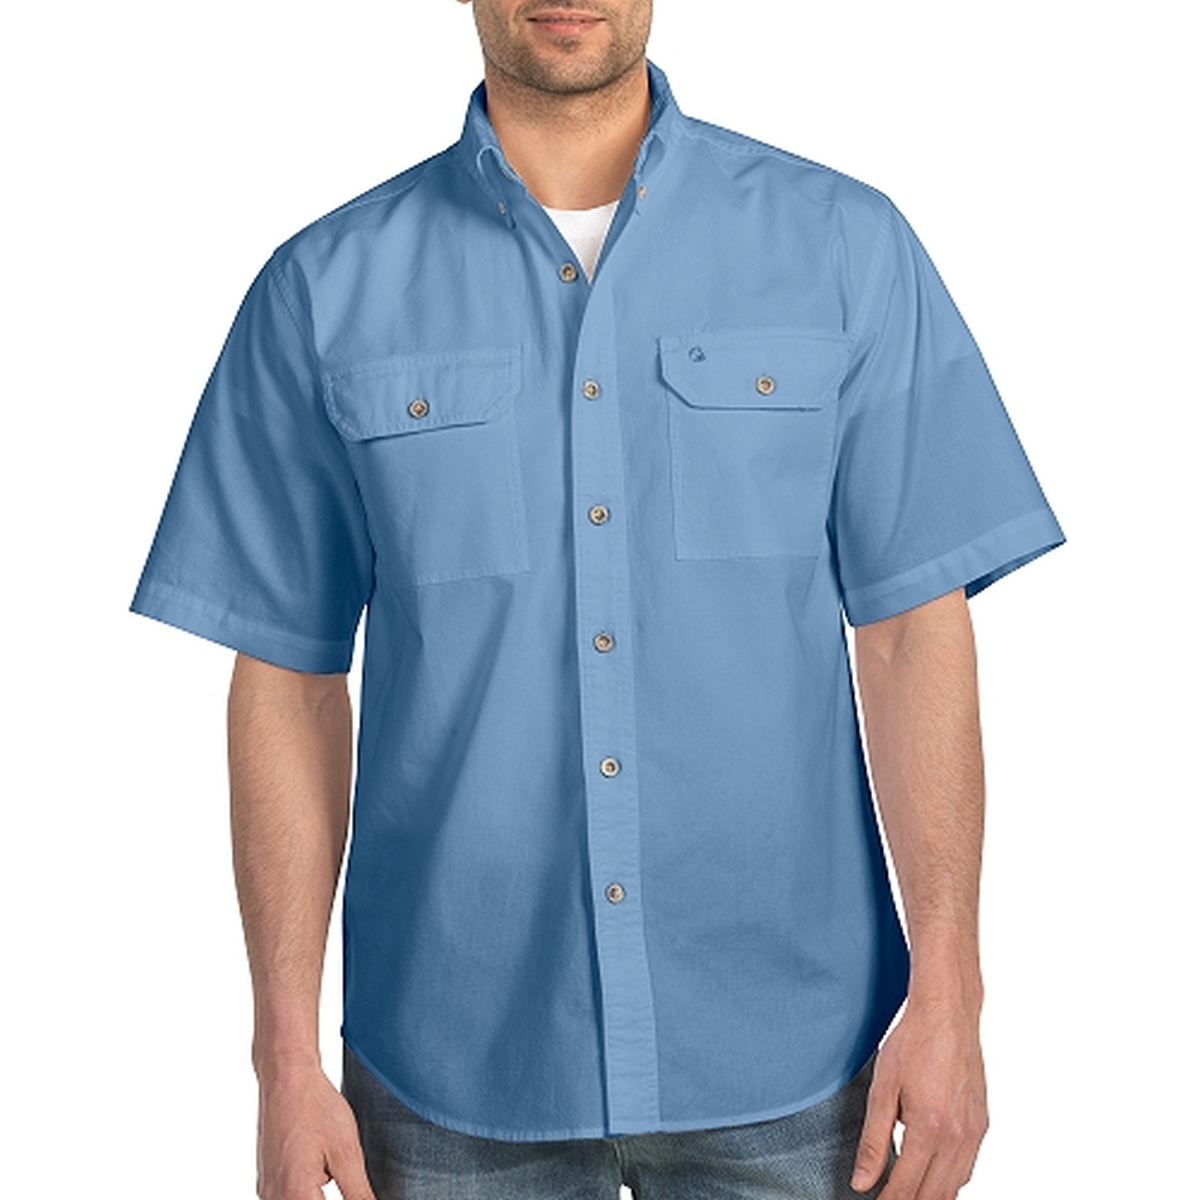 Buy Mens Fort Solid Short Sleeve Shirt - CH Online at Best price - MS